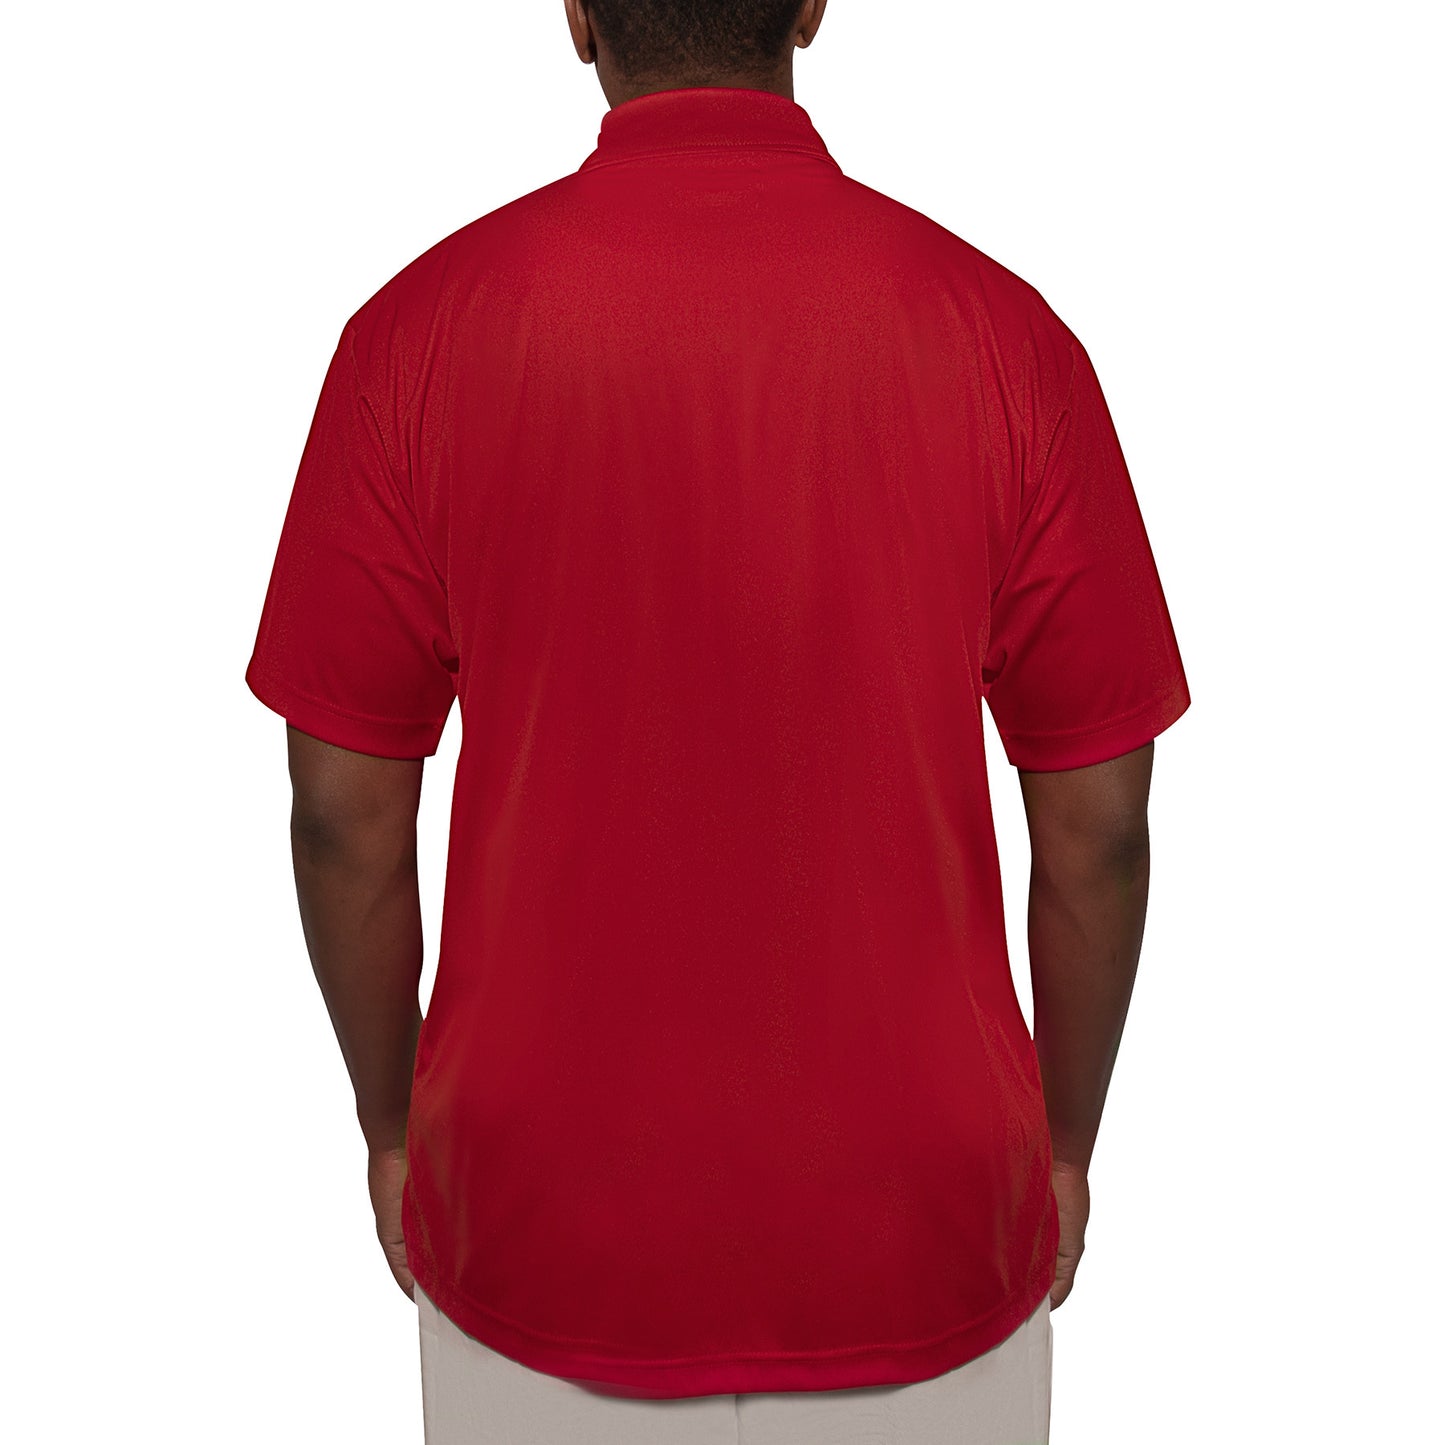 Men's Tactical Performance Polo Shirt In Grey or Red 3-Button Polyester Golf